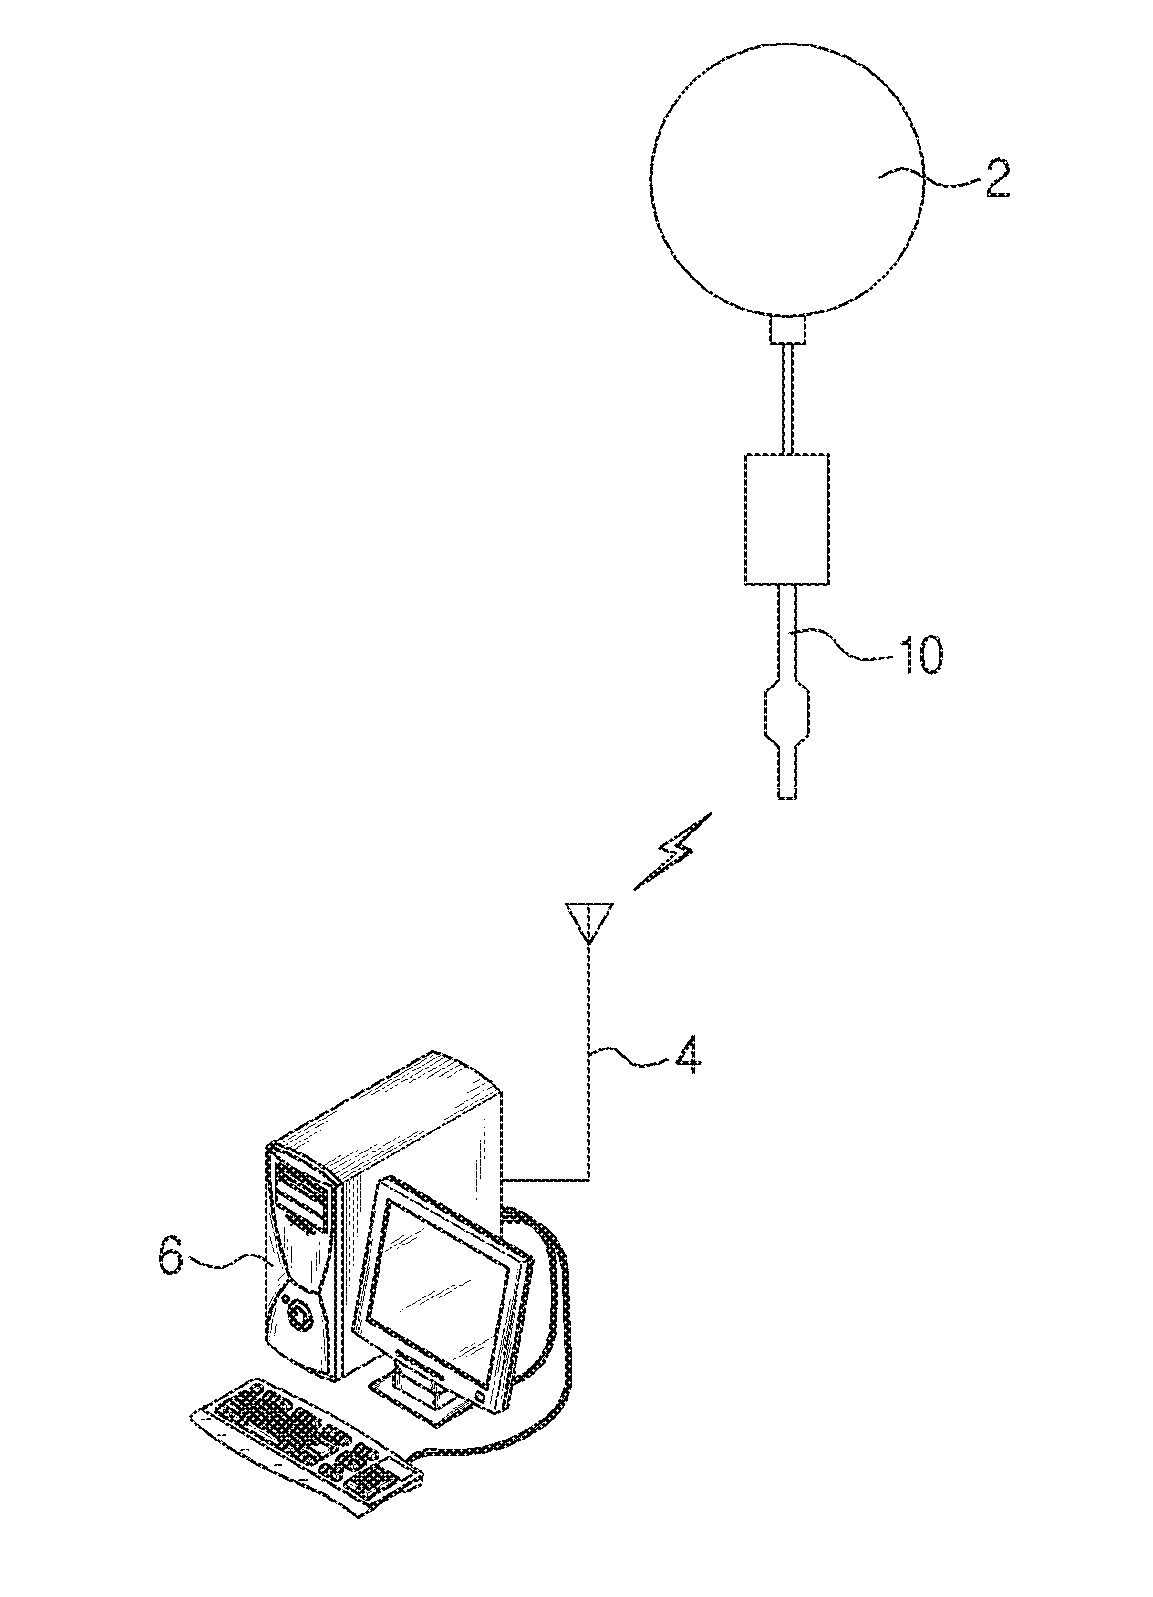 Radiosonde provided a plurality of temperature sensors measuring method of temperature using it, correction system thereof, and correction method